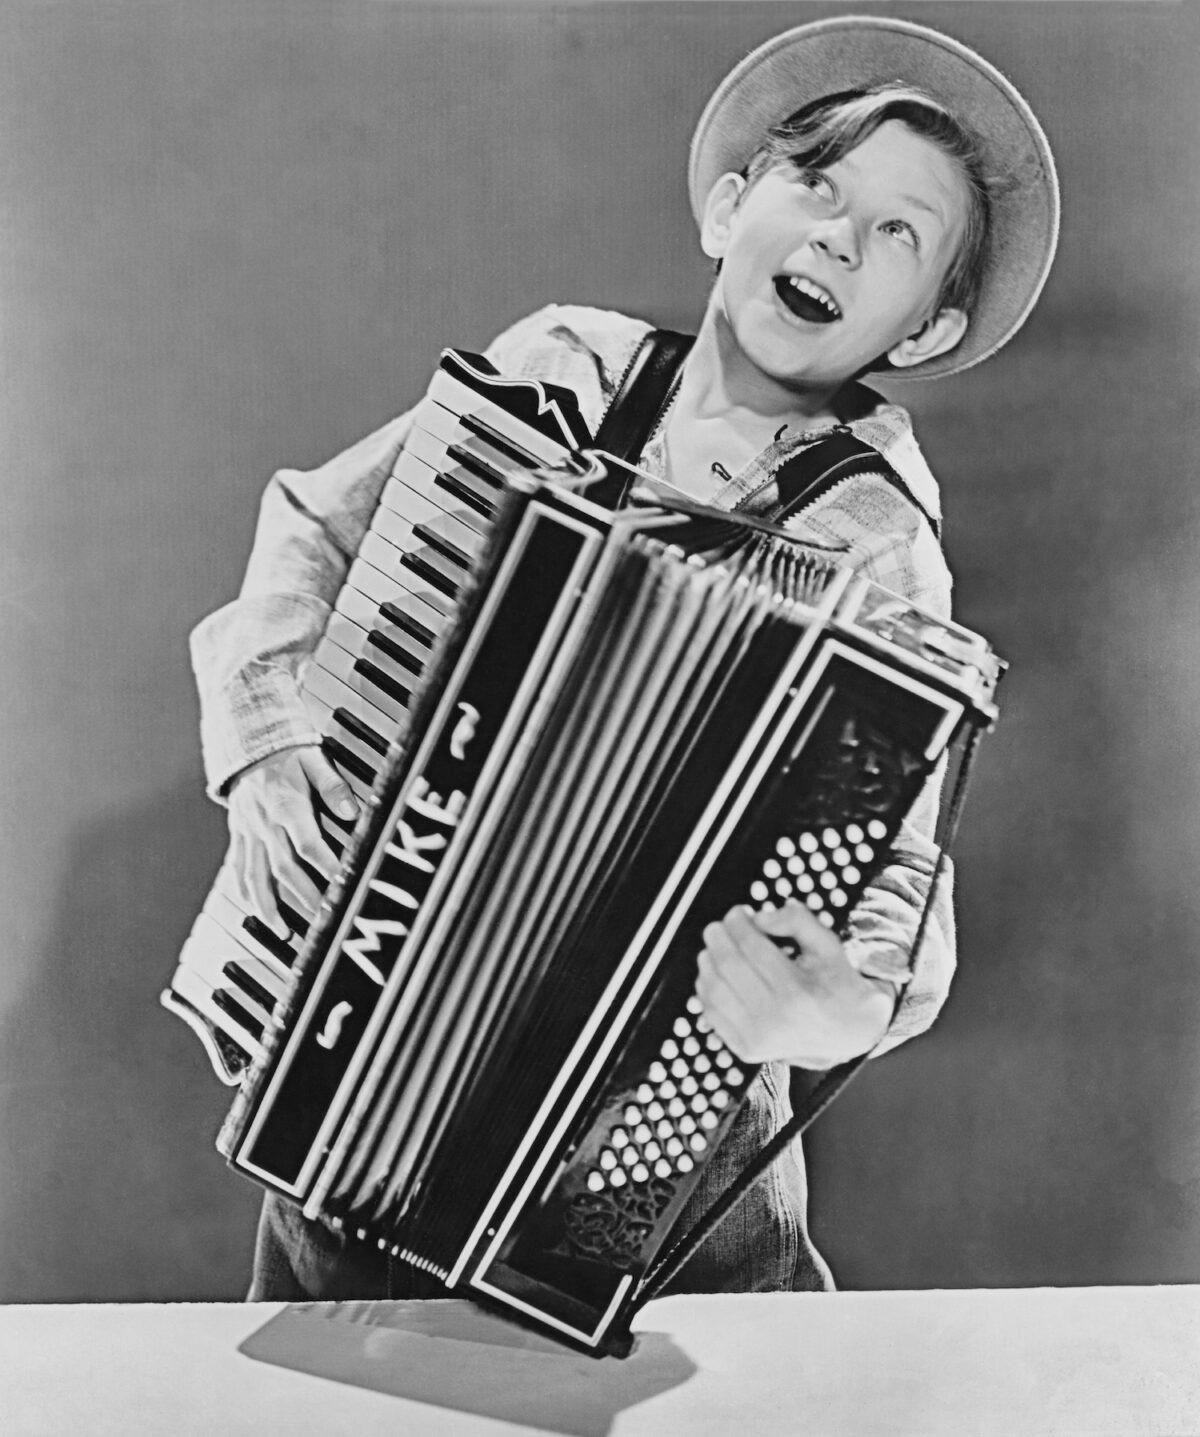 American actor Donald O'Connor playing the accordion at age 12 in 1938. (Pictorial Parade/Archive Photos/Getty Images)